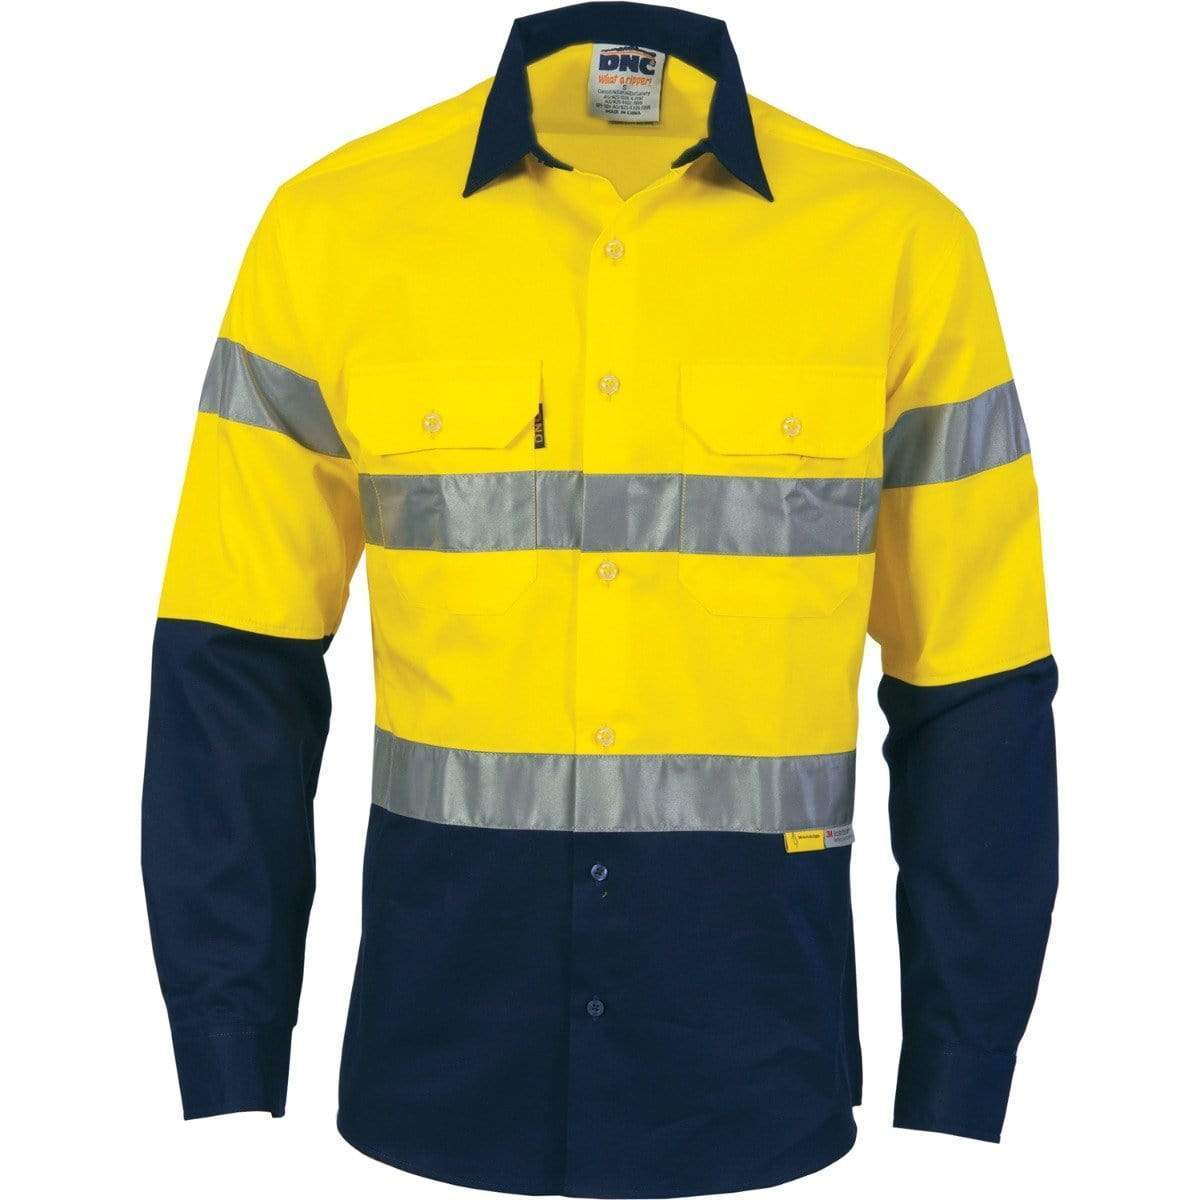 Dnc Workwear Hi-vis Two Tone Drill Long Sleeve Shirt With 3m 8910 Reflective Tape - 3836 Work Wear DNC Workwear Yellow/Navy S 